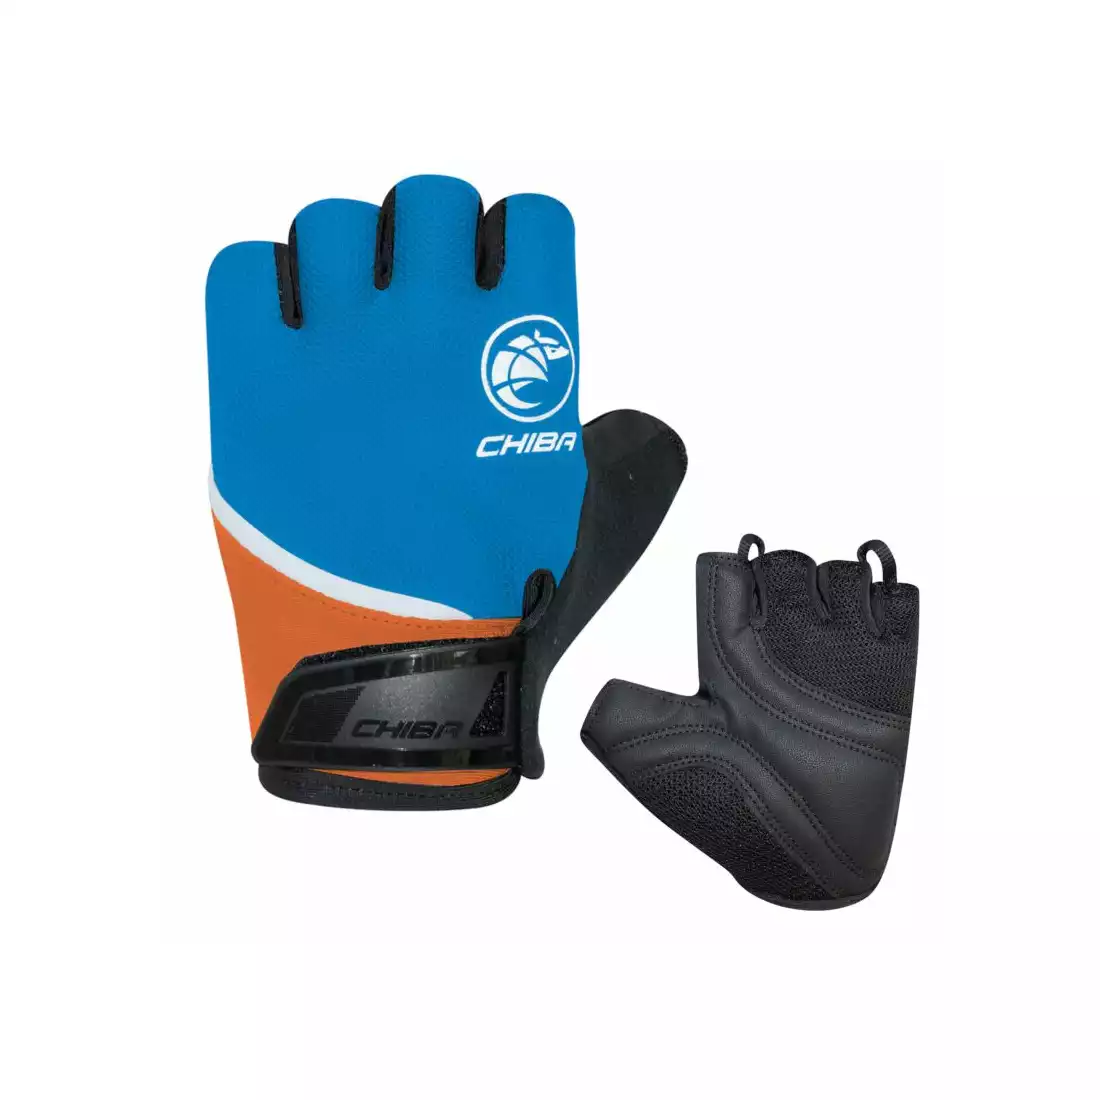 CHIBA YOUTH Children's cycling gloves, blue